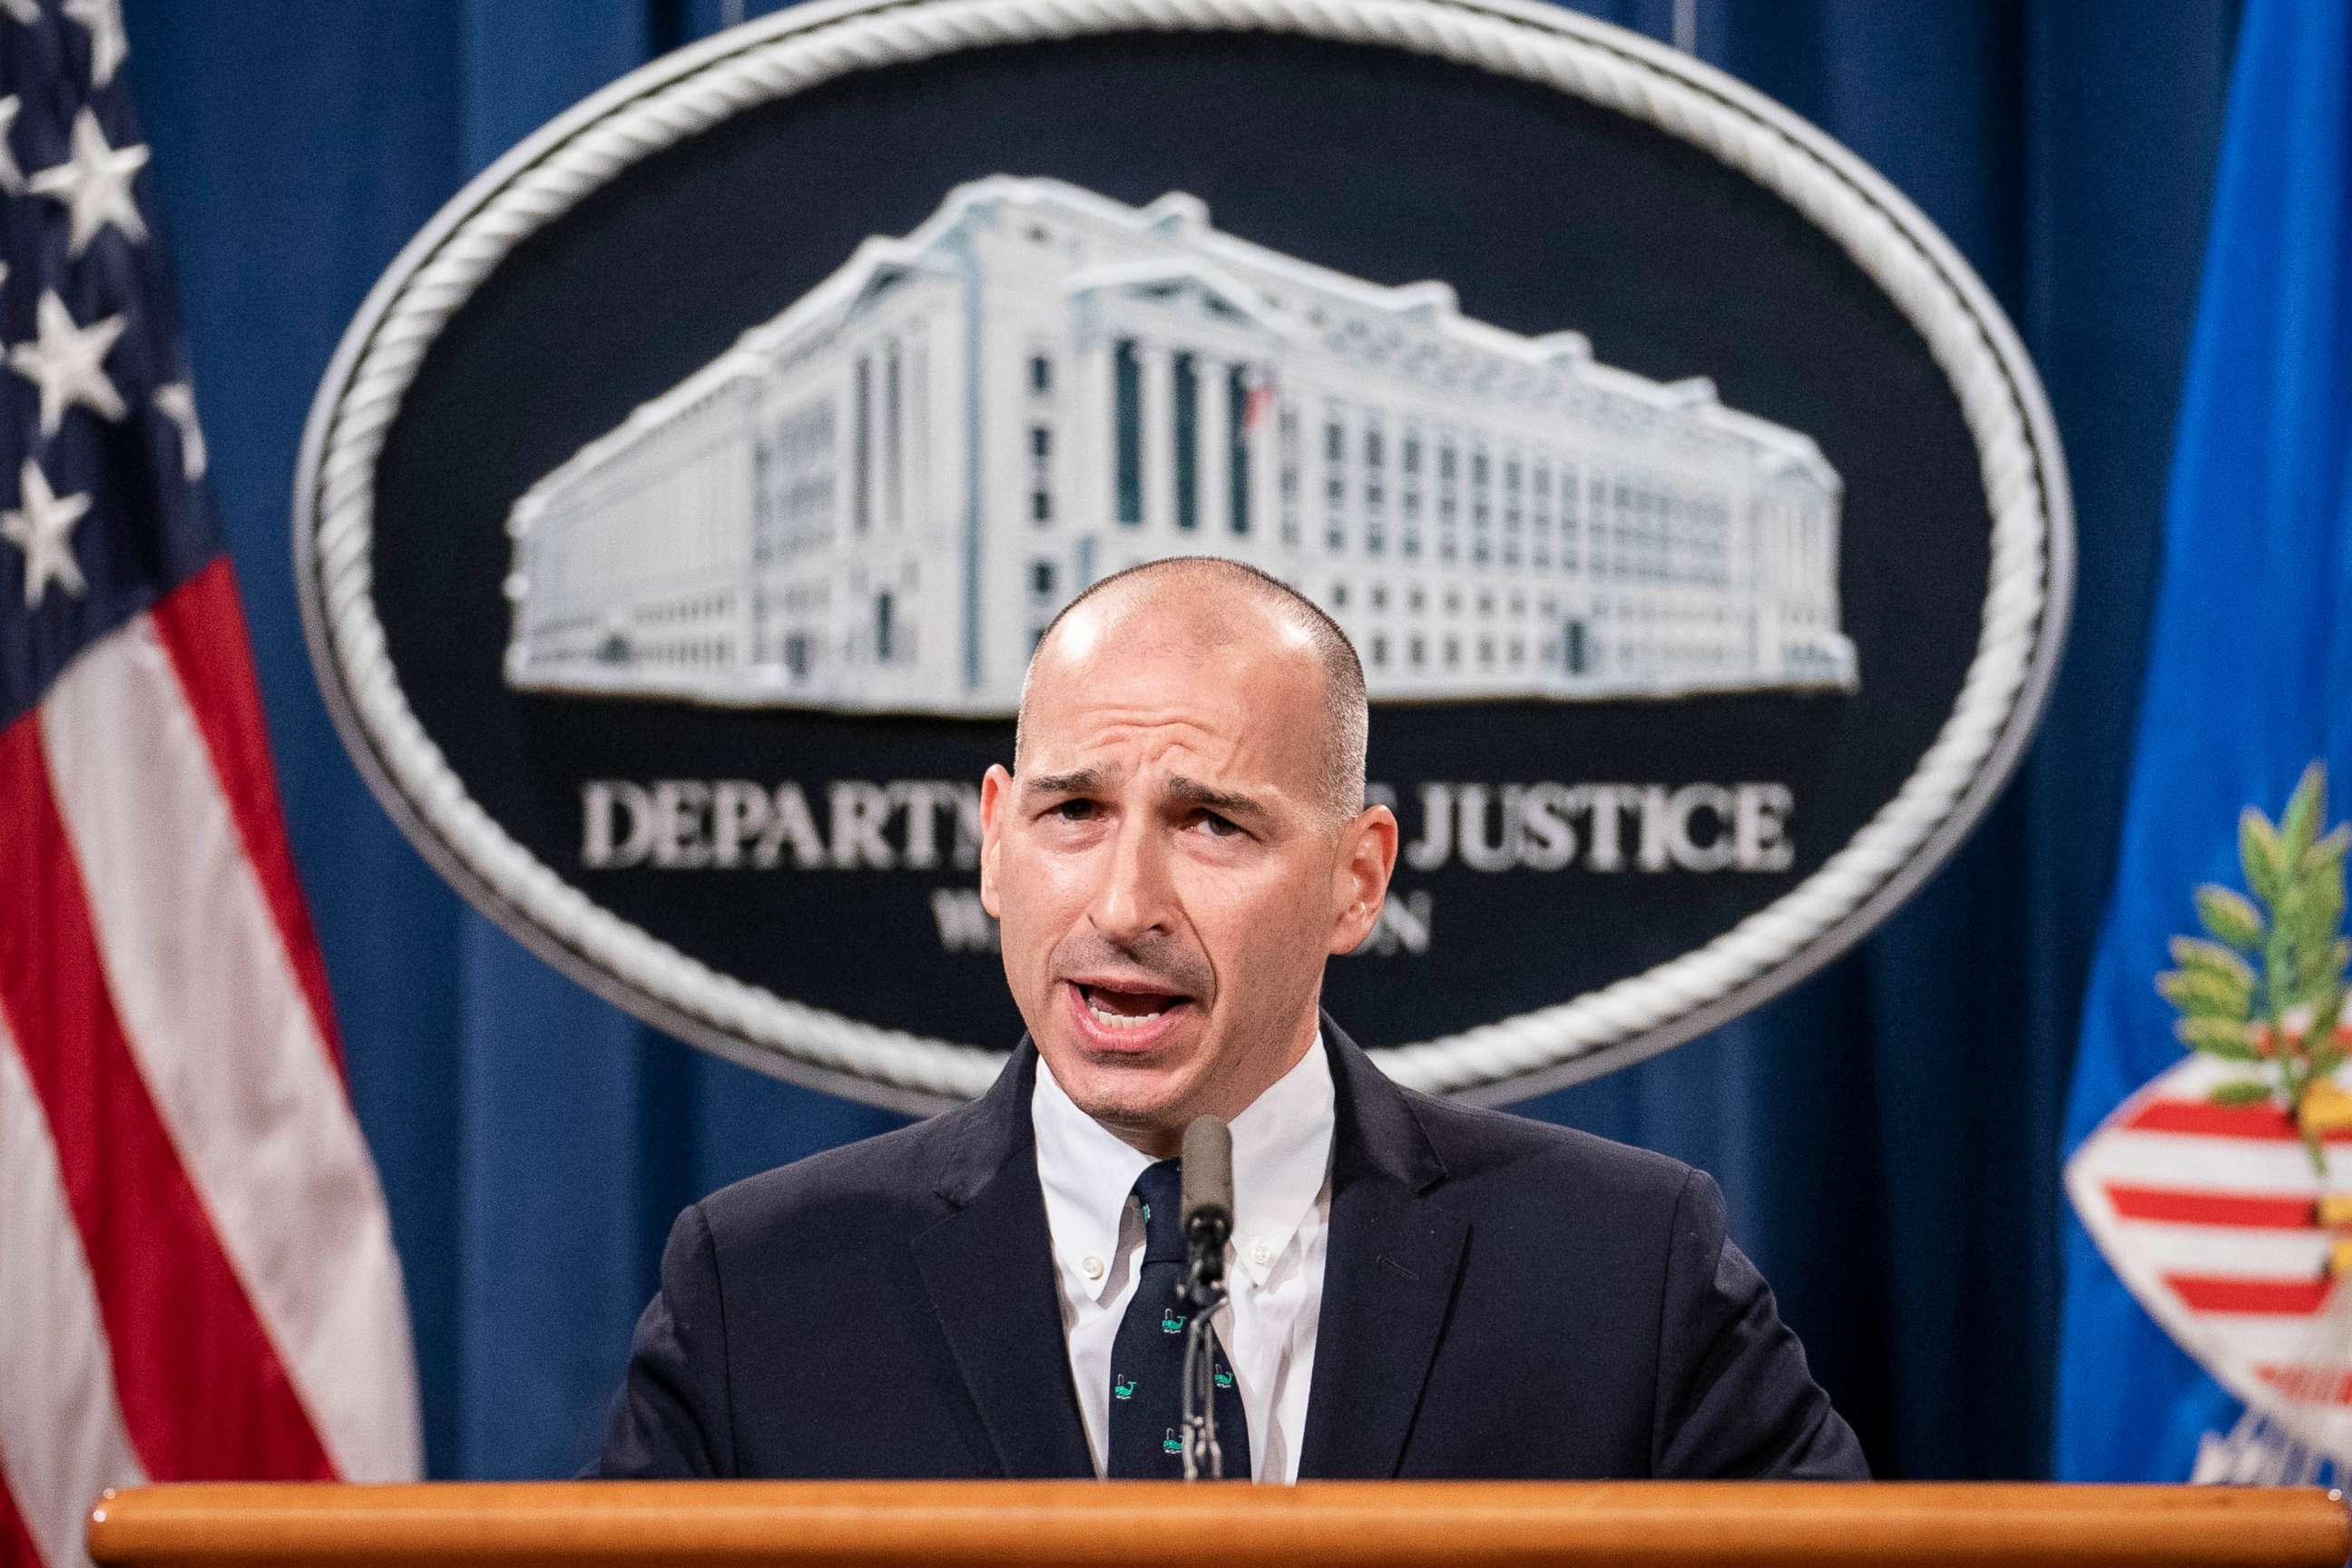 PHOTO: Michael Sherwin, Acting U.S. Attorney for the District of Columbia, speaks at a press conference to give an update on the investigation into the Capitol Hill riots, Jan. 12, 2021, in Washington, DC.